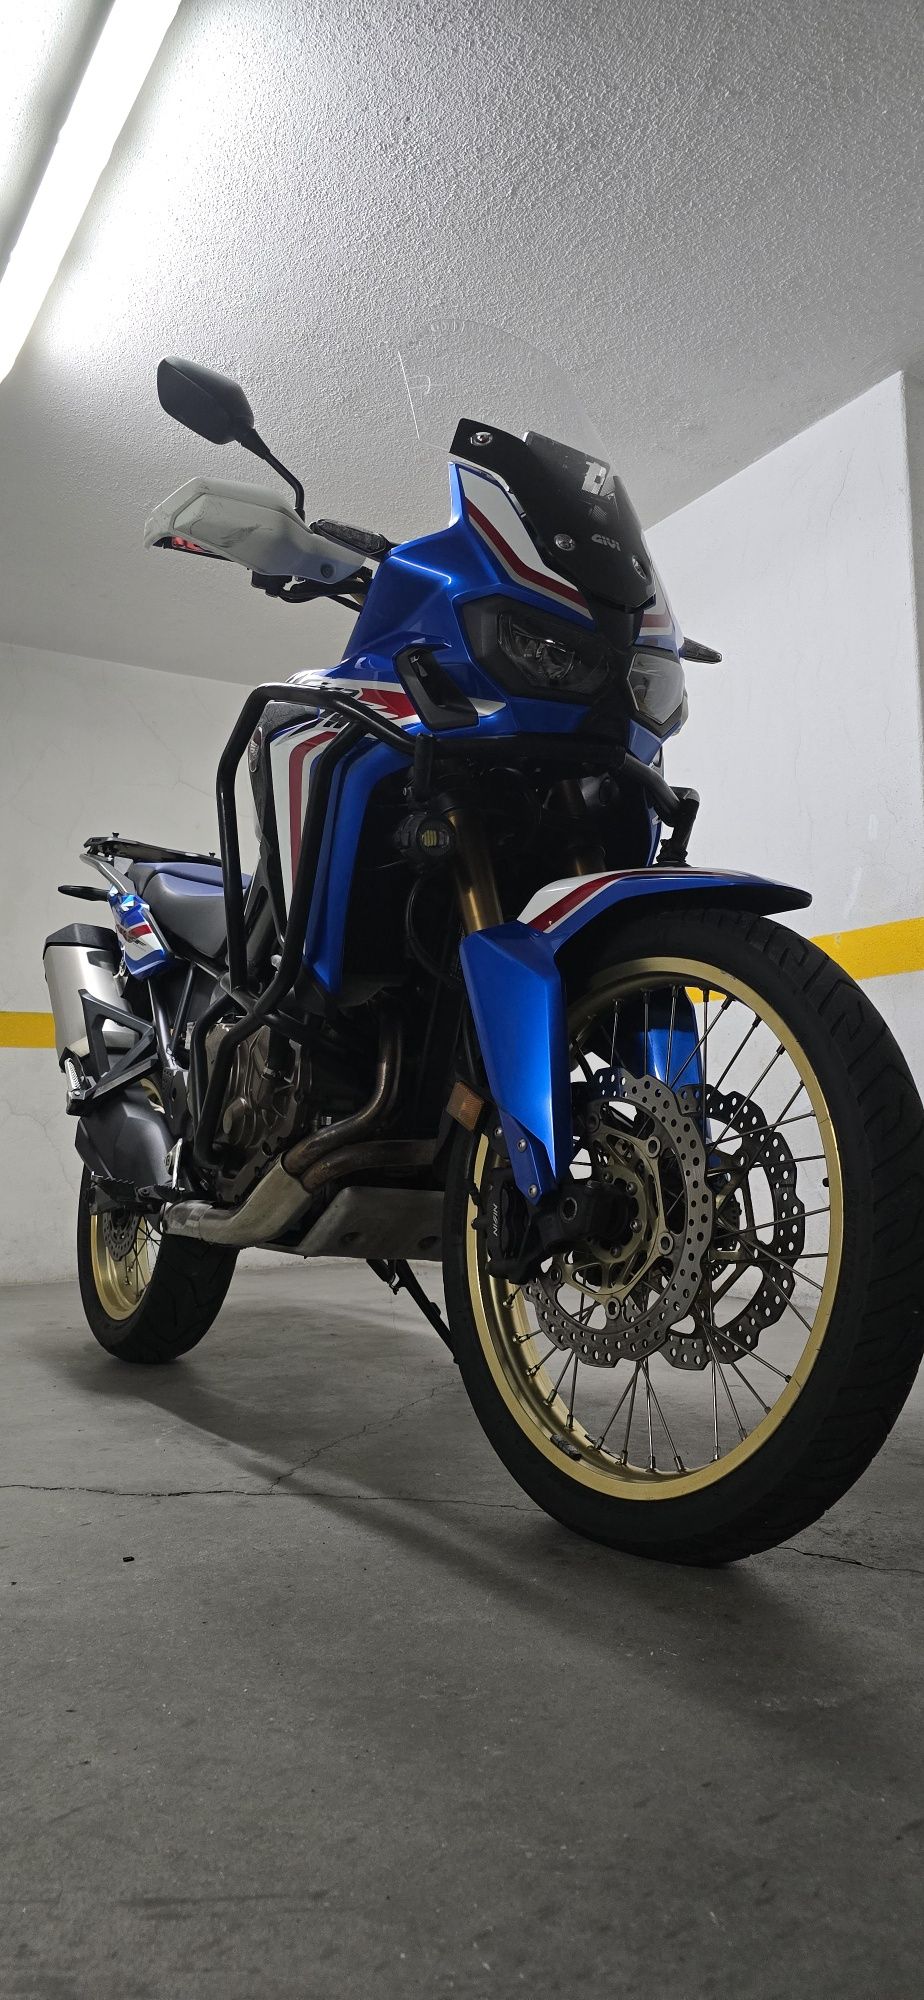 Africa Twin 2019